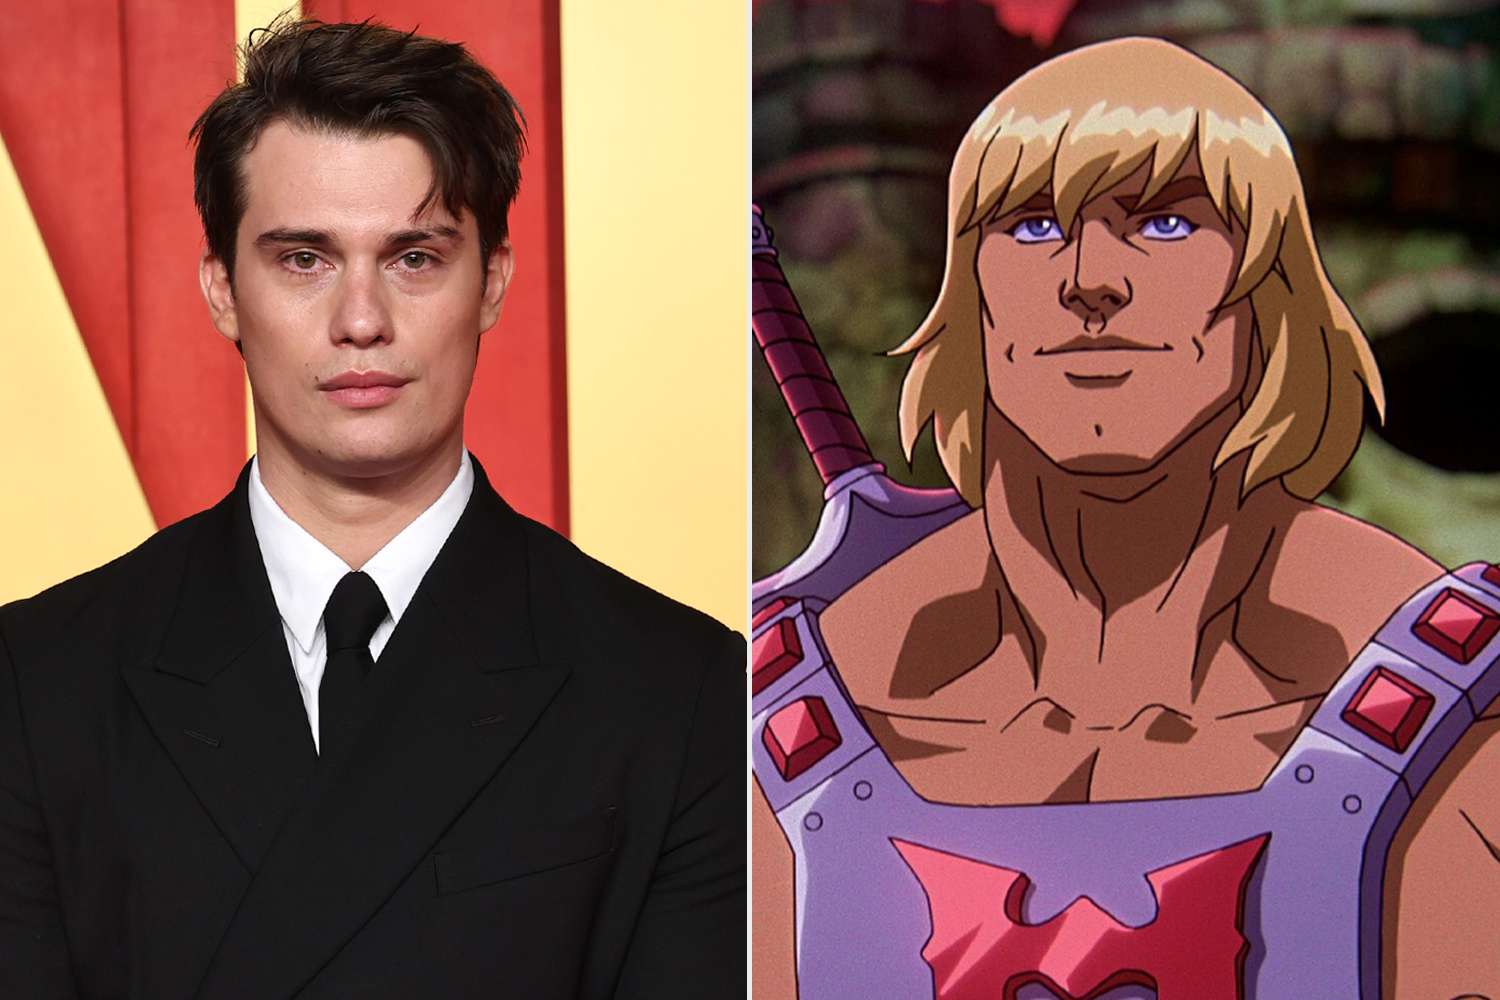 Nicholas Galitzine 'Cannot Wait' to Play He-Man in New Movie: 'It Has Been a Dream for So Long'